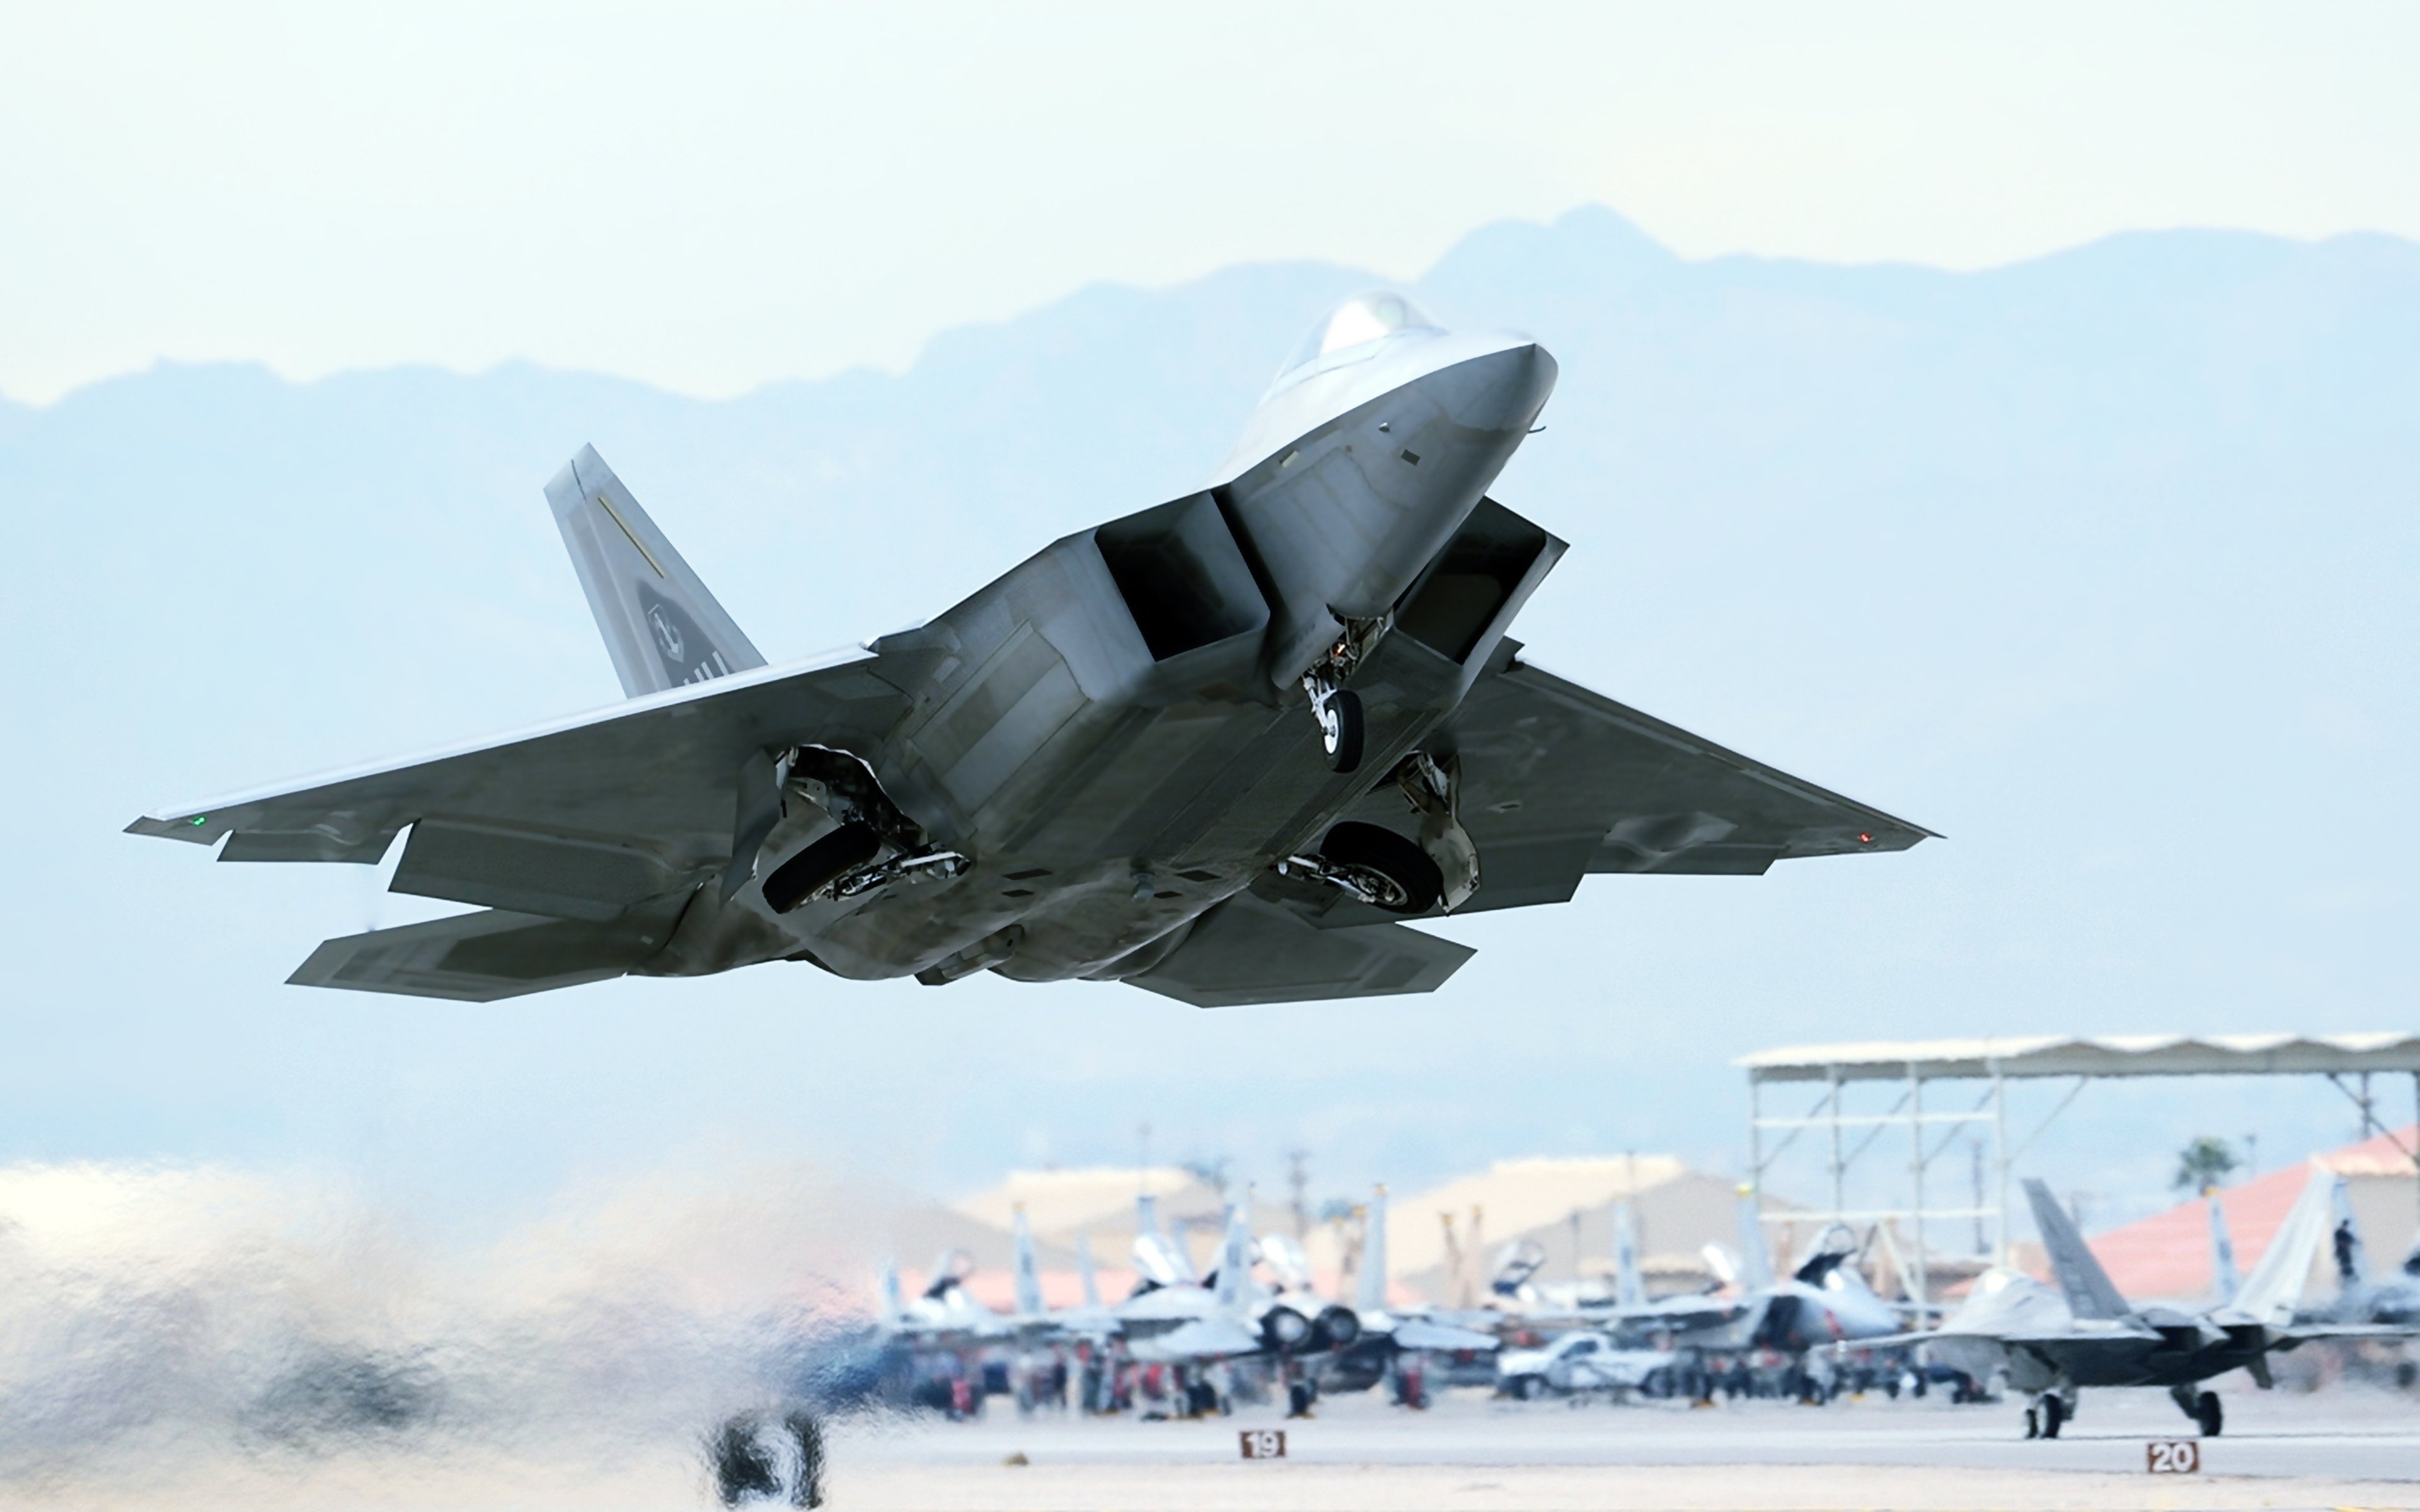 f 22, Raptor, Aircrafts, Weapons, Fighters, Planes, Airport, Army, Military, Wars Wallpaper